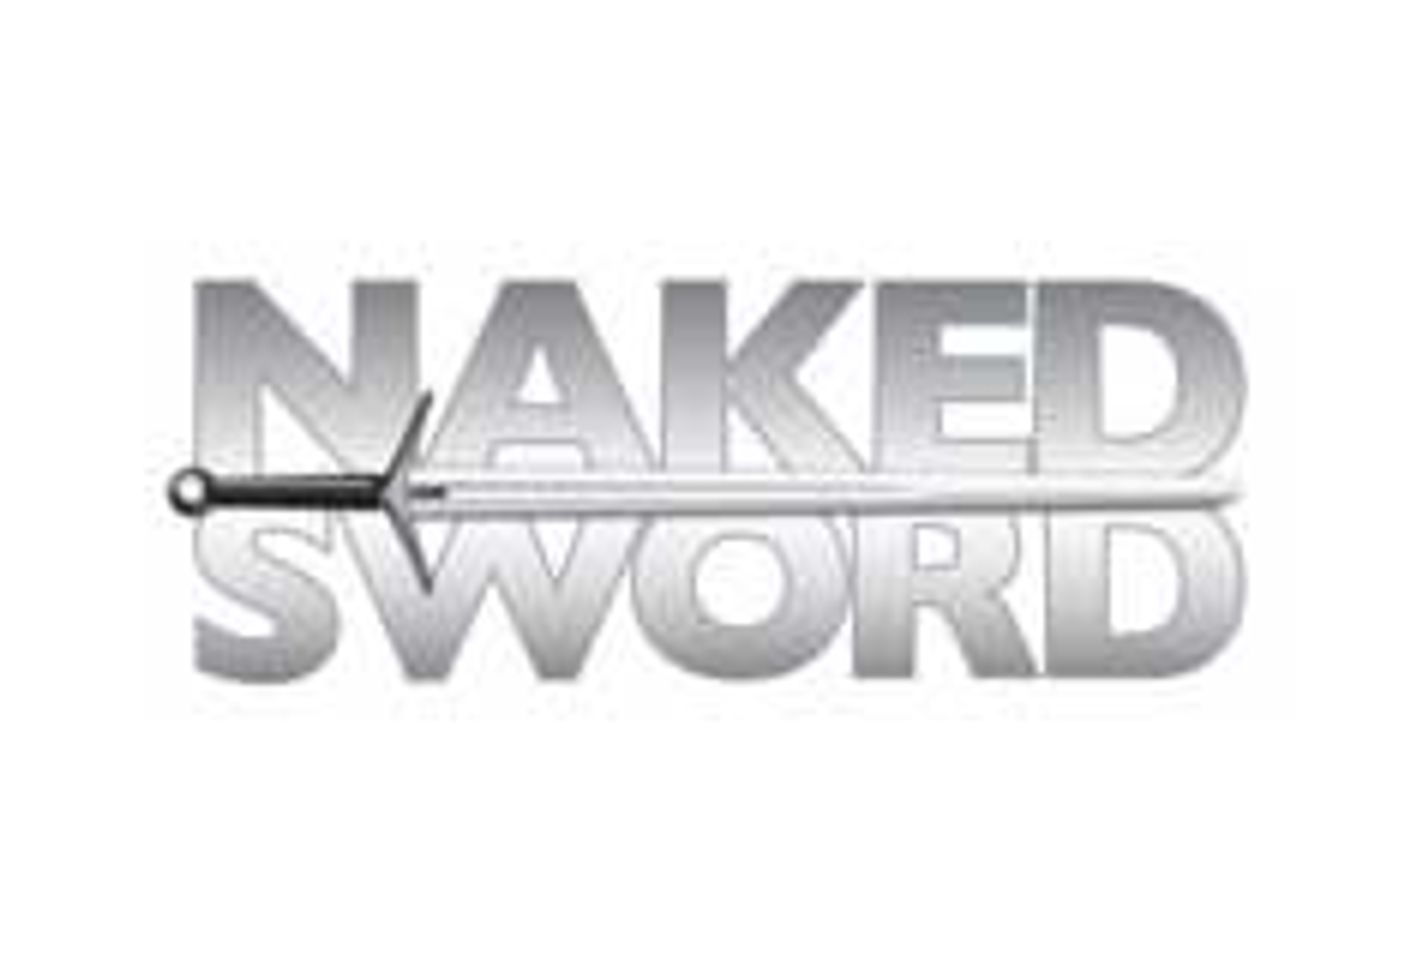 NakedSword Titles Added to Falcon, Raging Stallion Store